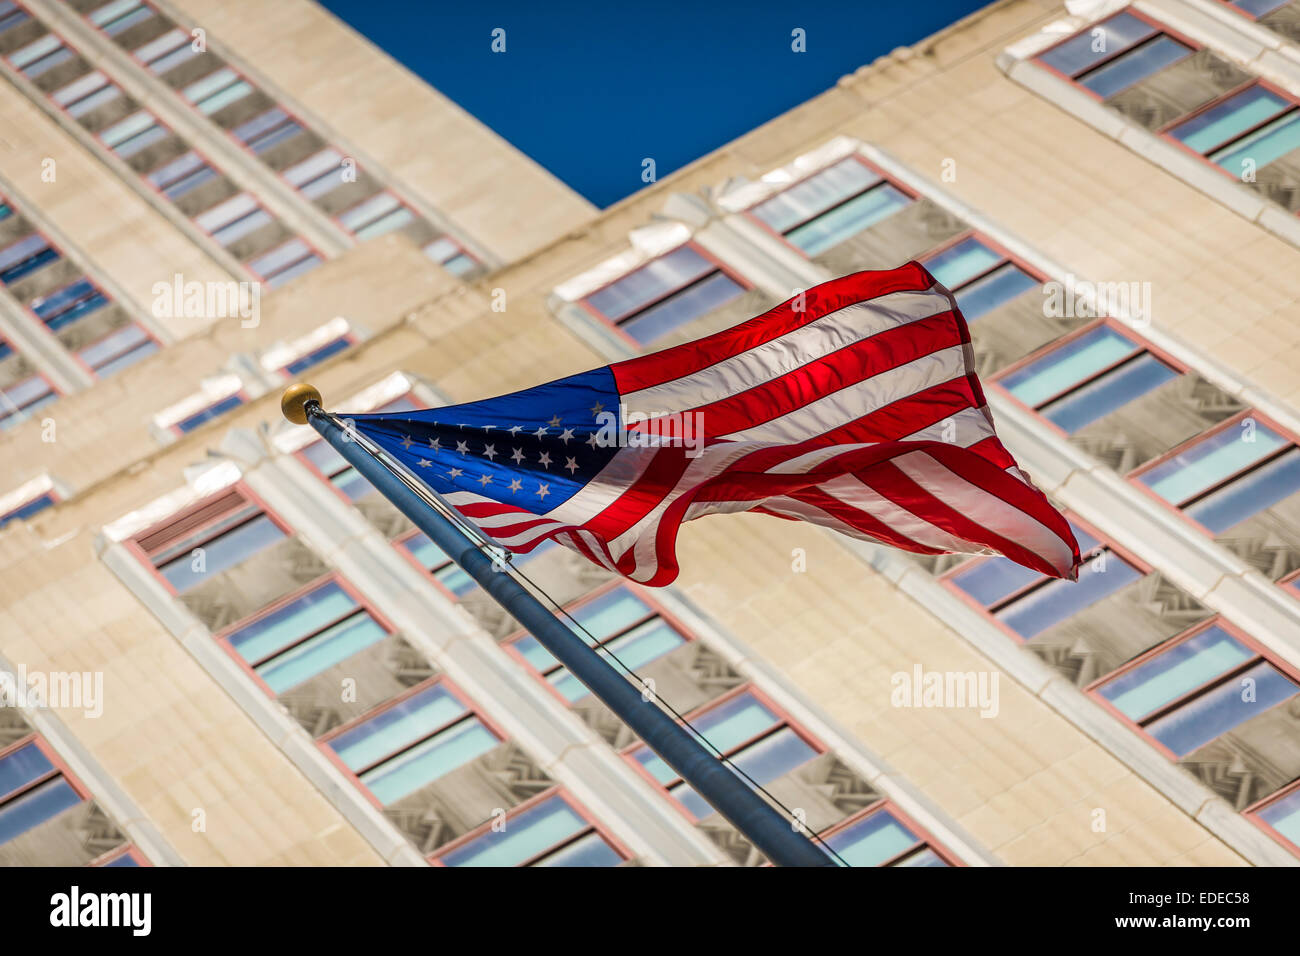 The Stars & Stripes fly over the high rise buildings of Manhattan in New York City - USA. Stock Photo